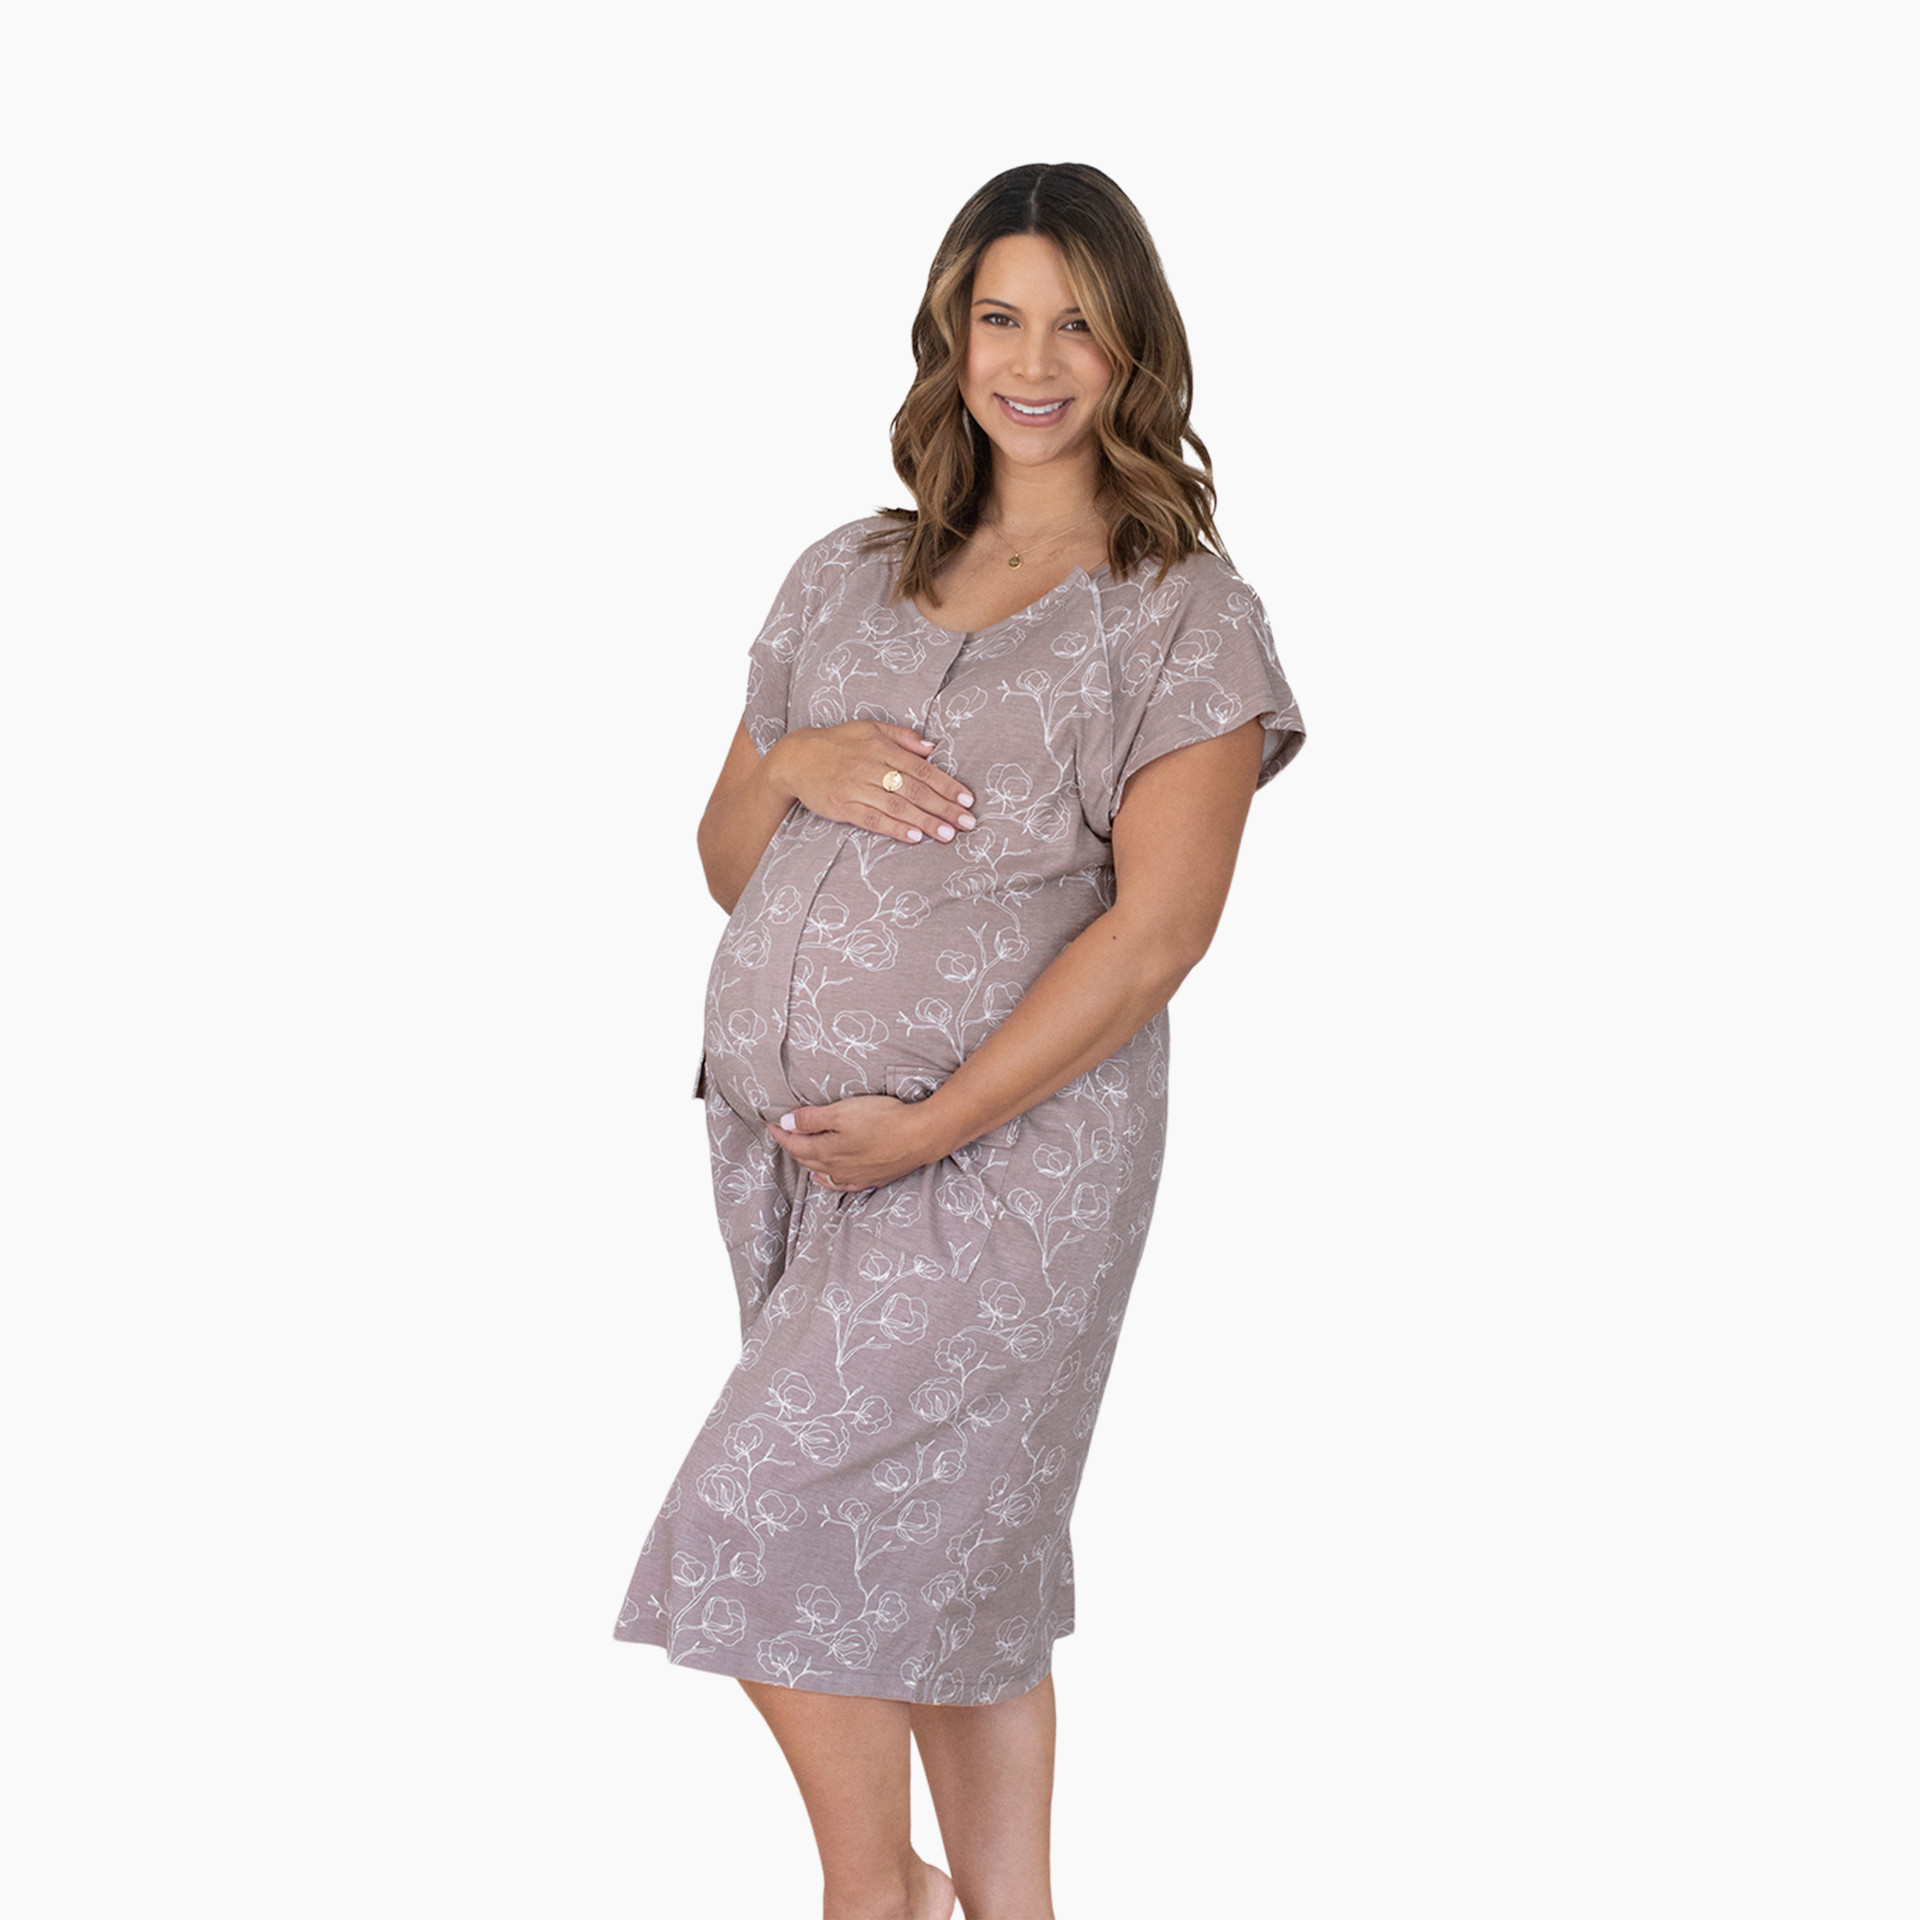 Kindred Bravely Universal Labor And Delivery Gown, 3 In 1 Labor, Delivery,  Nursing Gown For Hospital - Lilac Bloom, S/M/L